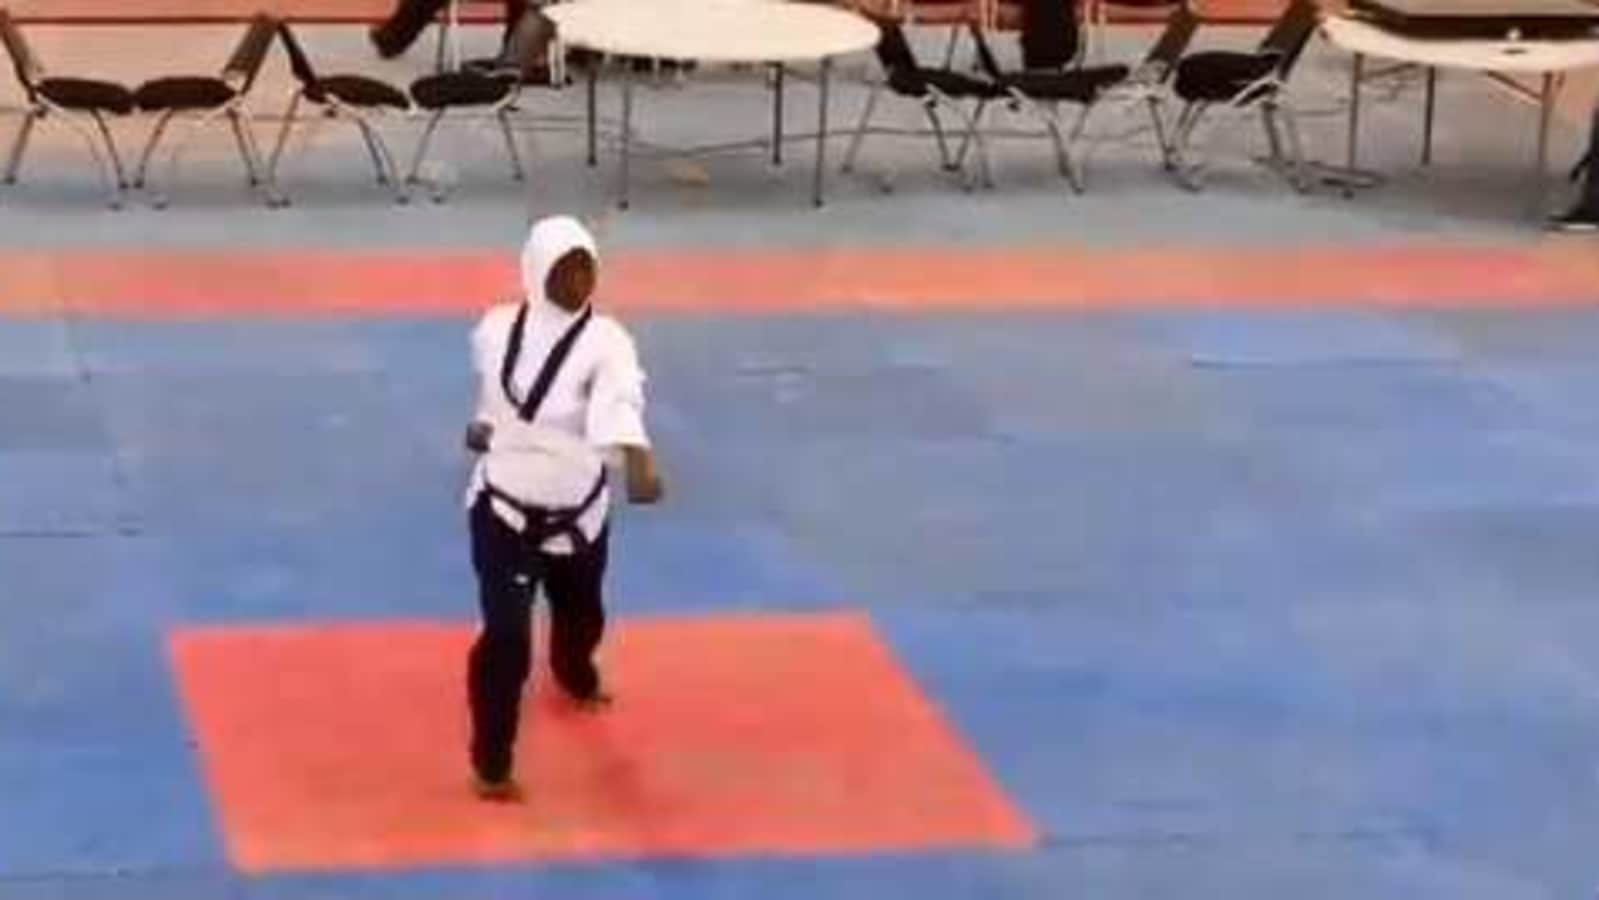 Eight months pregnant athlete wins gold medal in Taekwondo